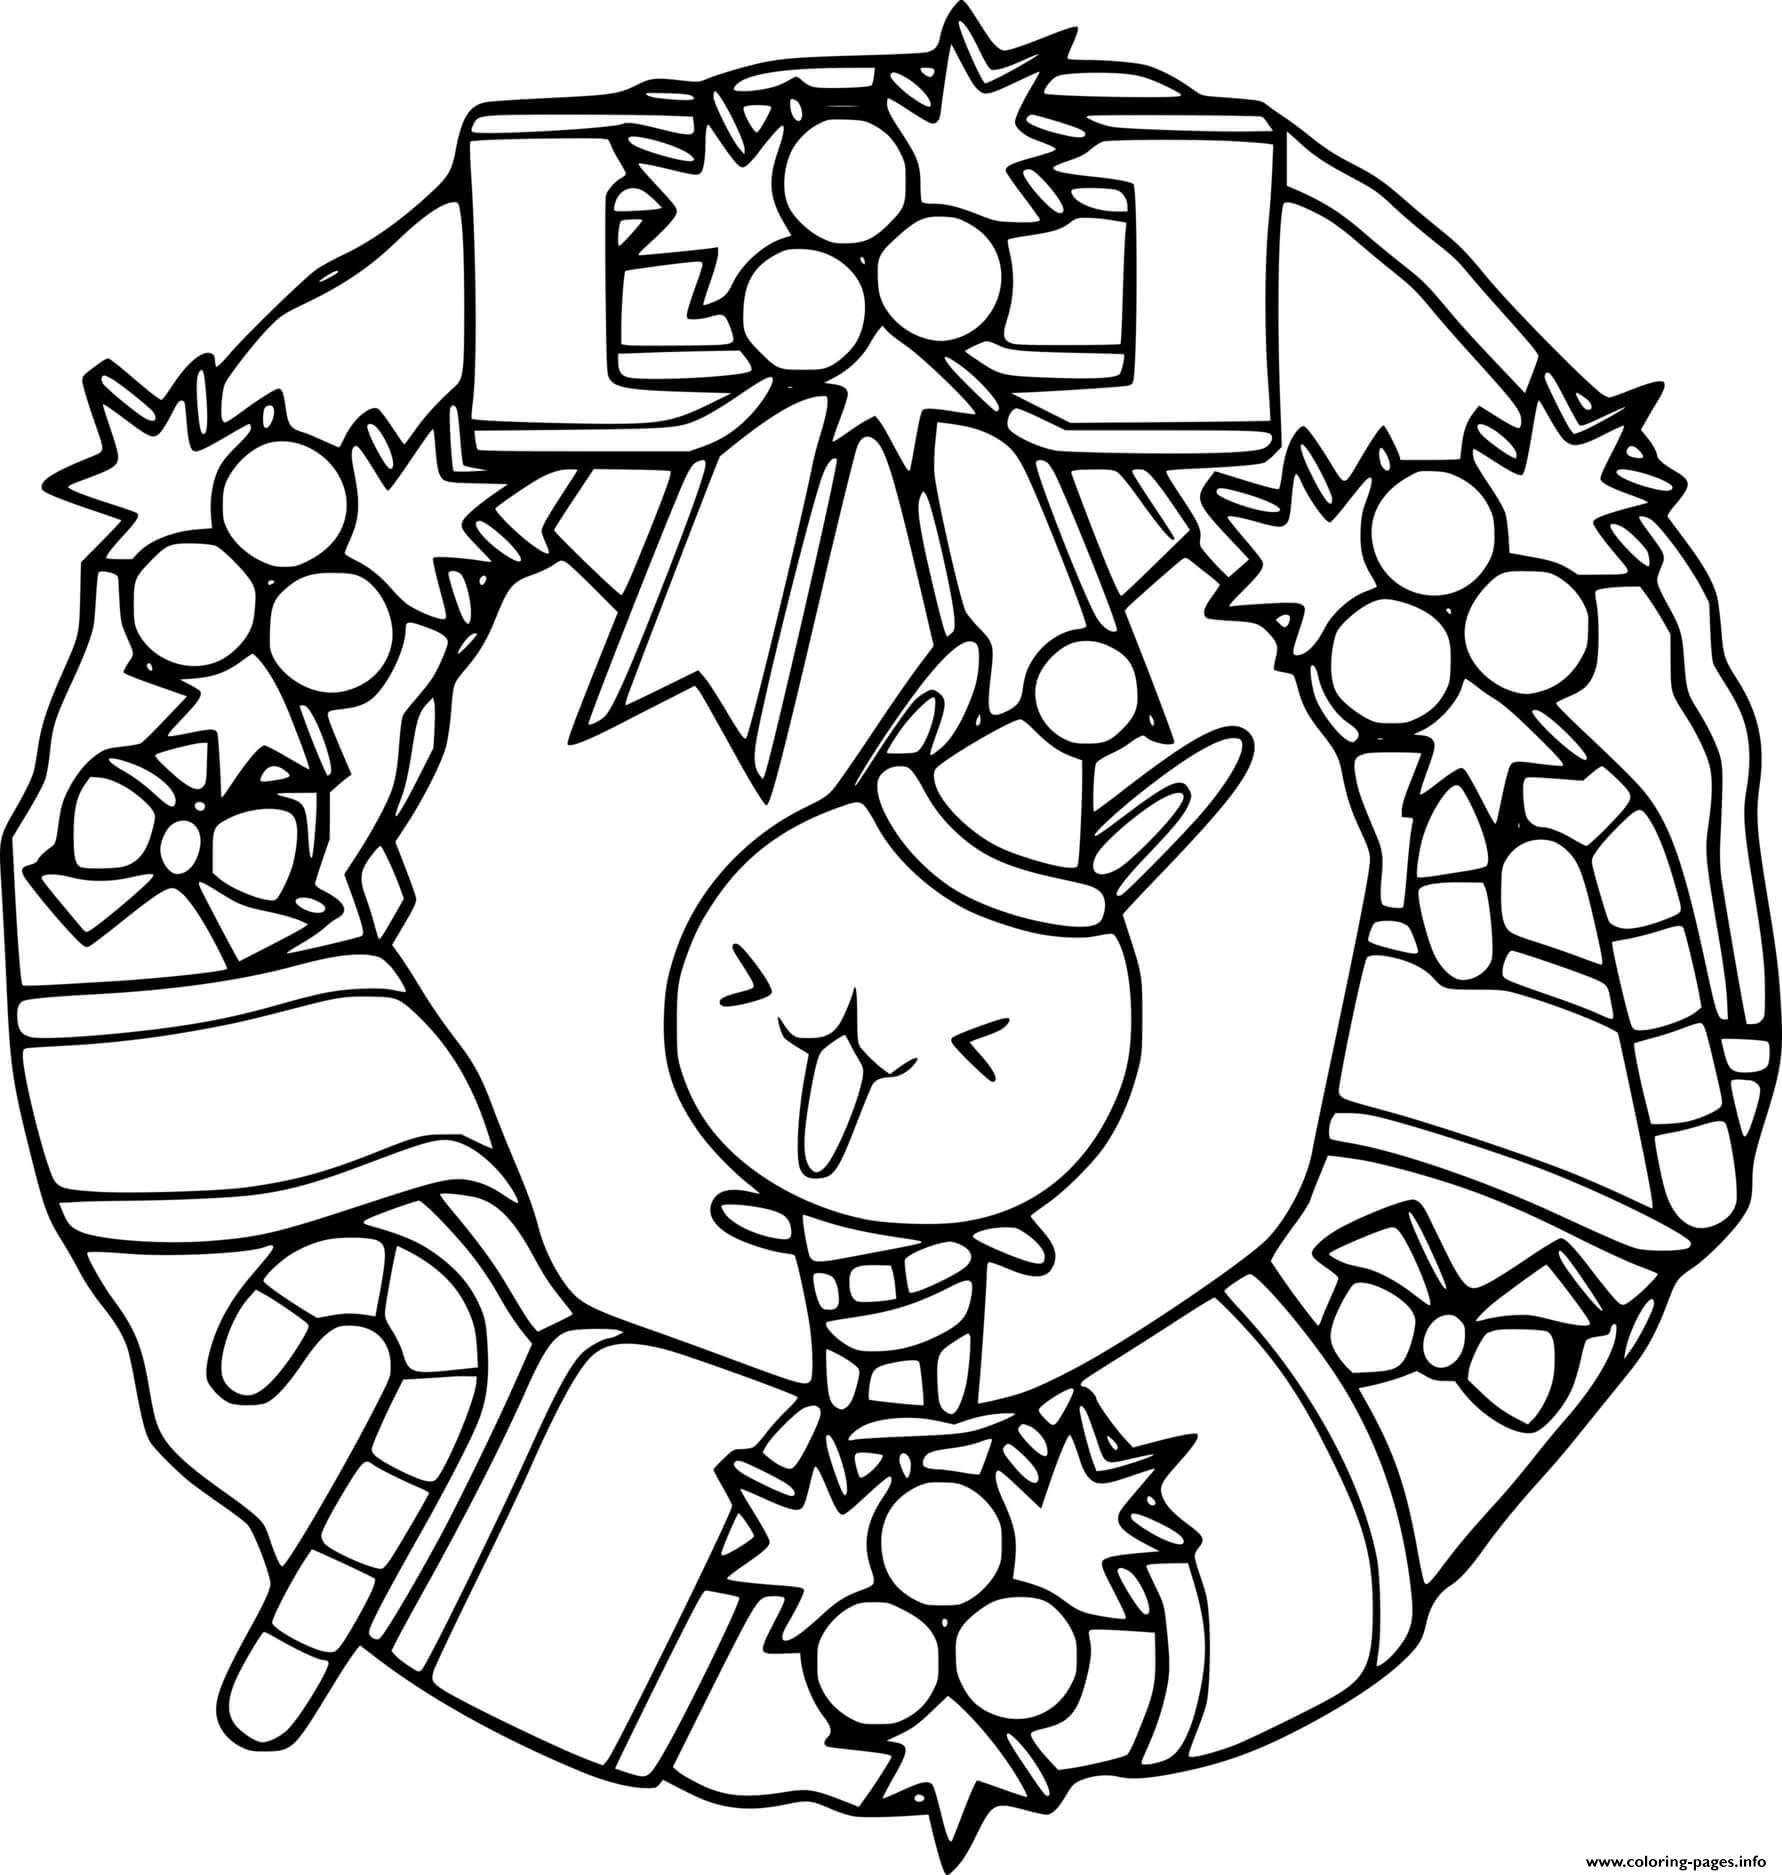 Funny Cat In The Christmas Wreath coloring